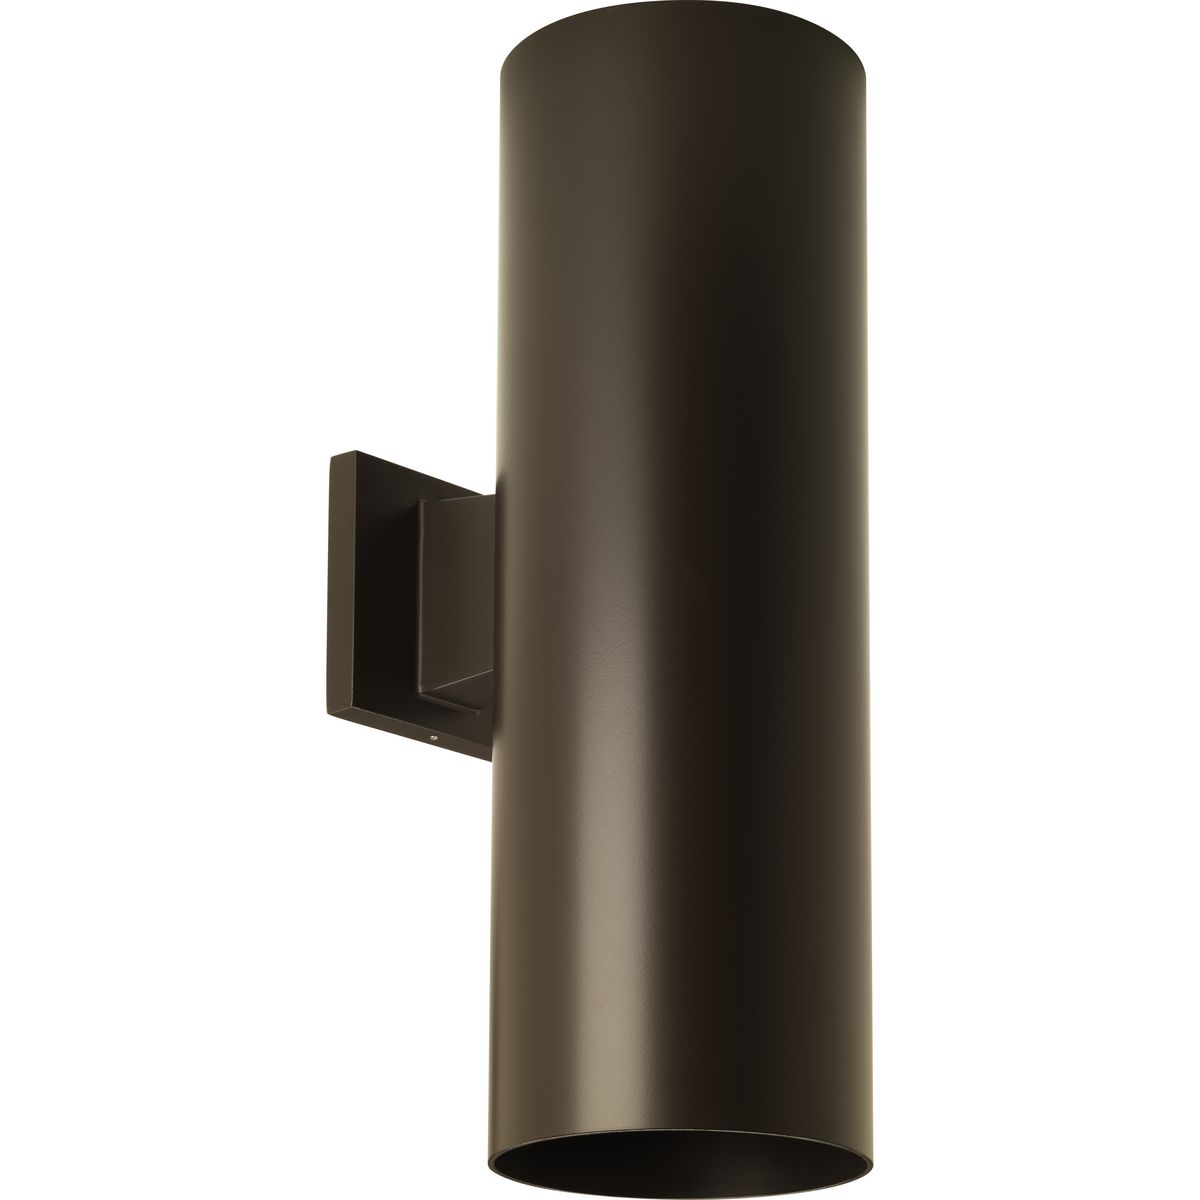 6" LED Outdoor Up/Down Wall Cylinder - Damp Location Listed - Model P5642-20/30K